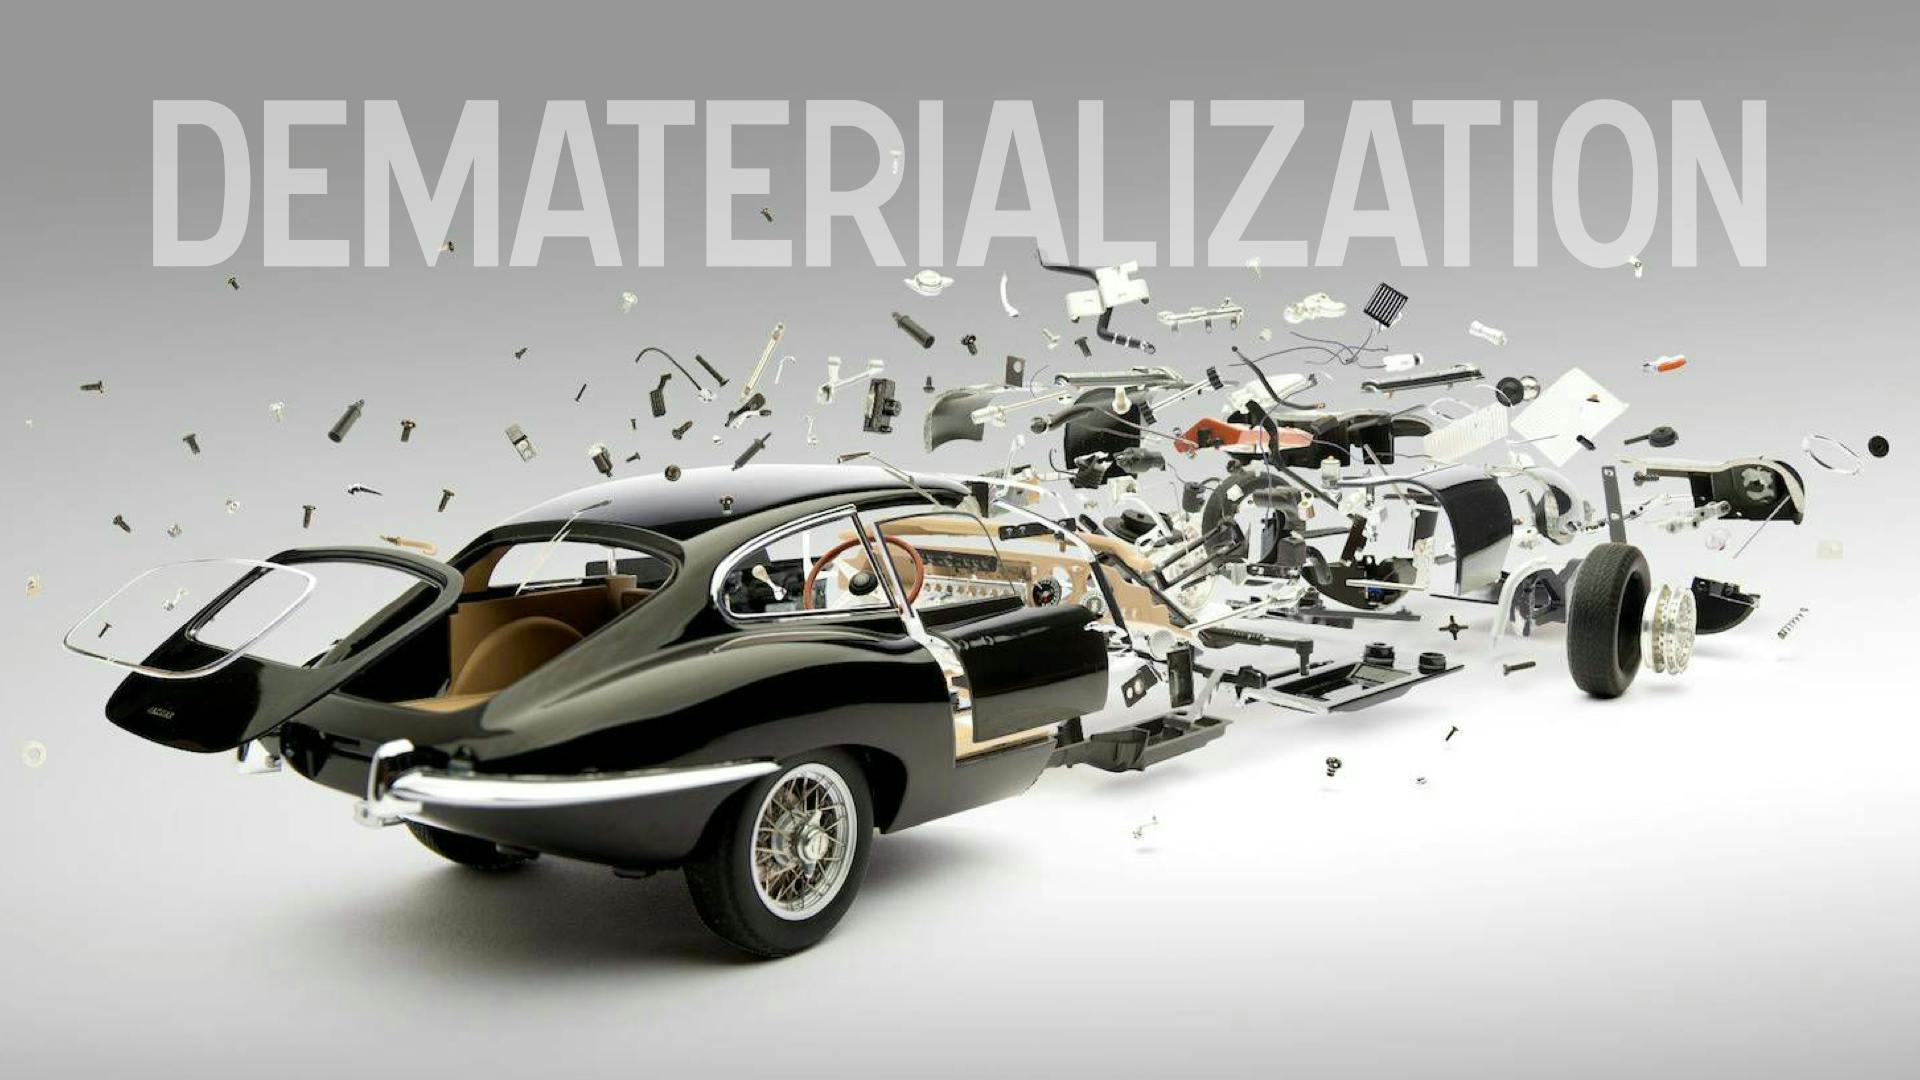 dematerialization - picture of car deconstructed